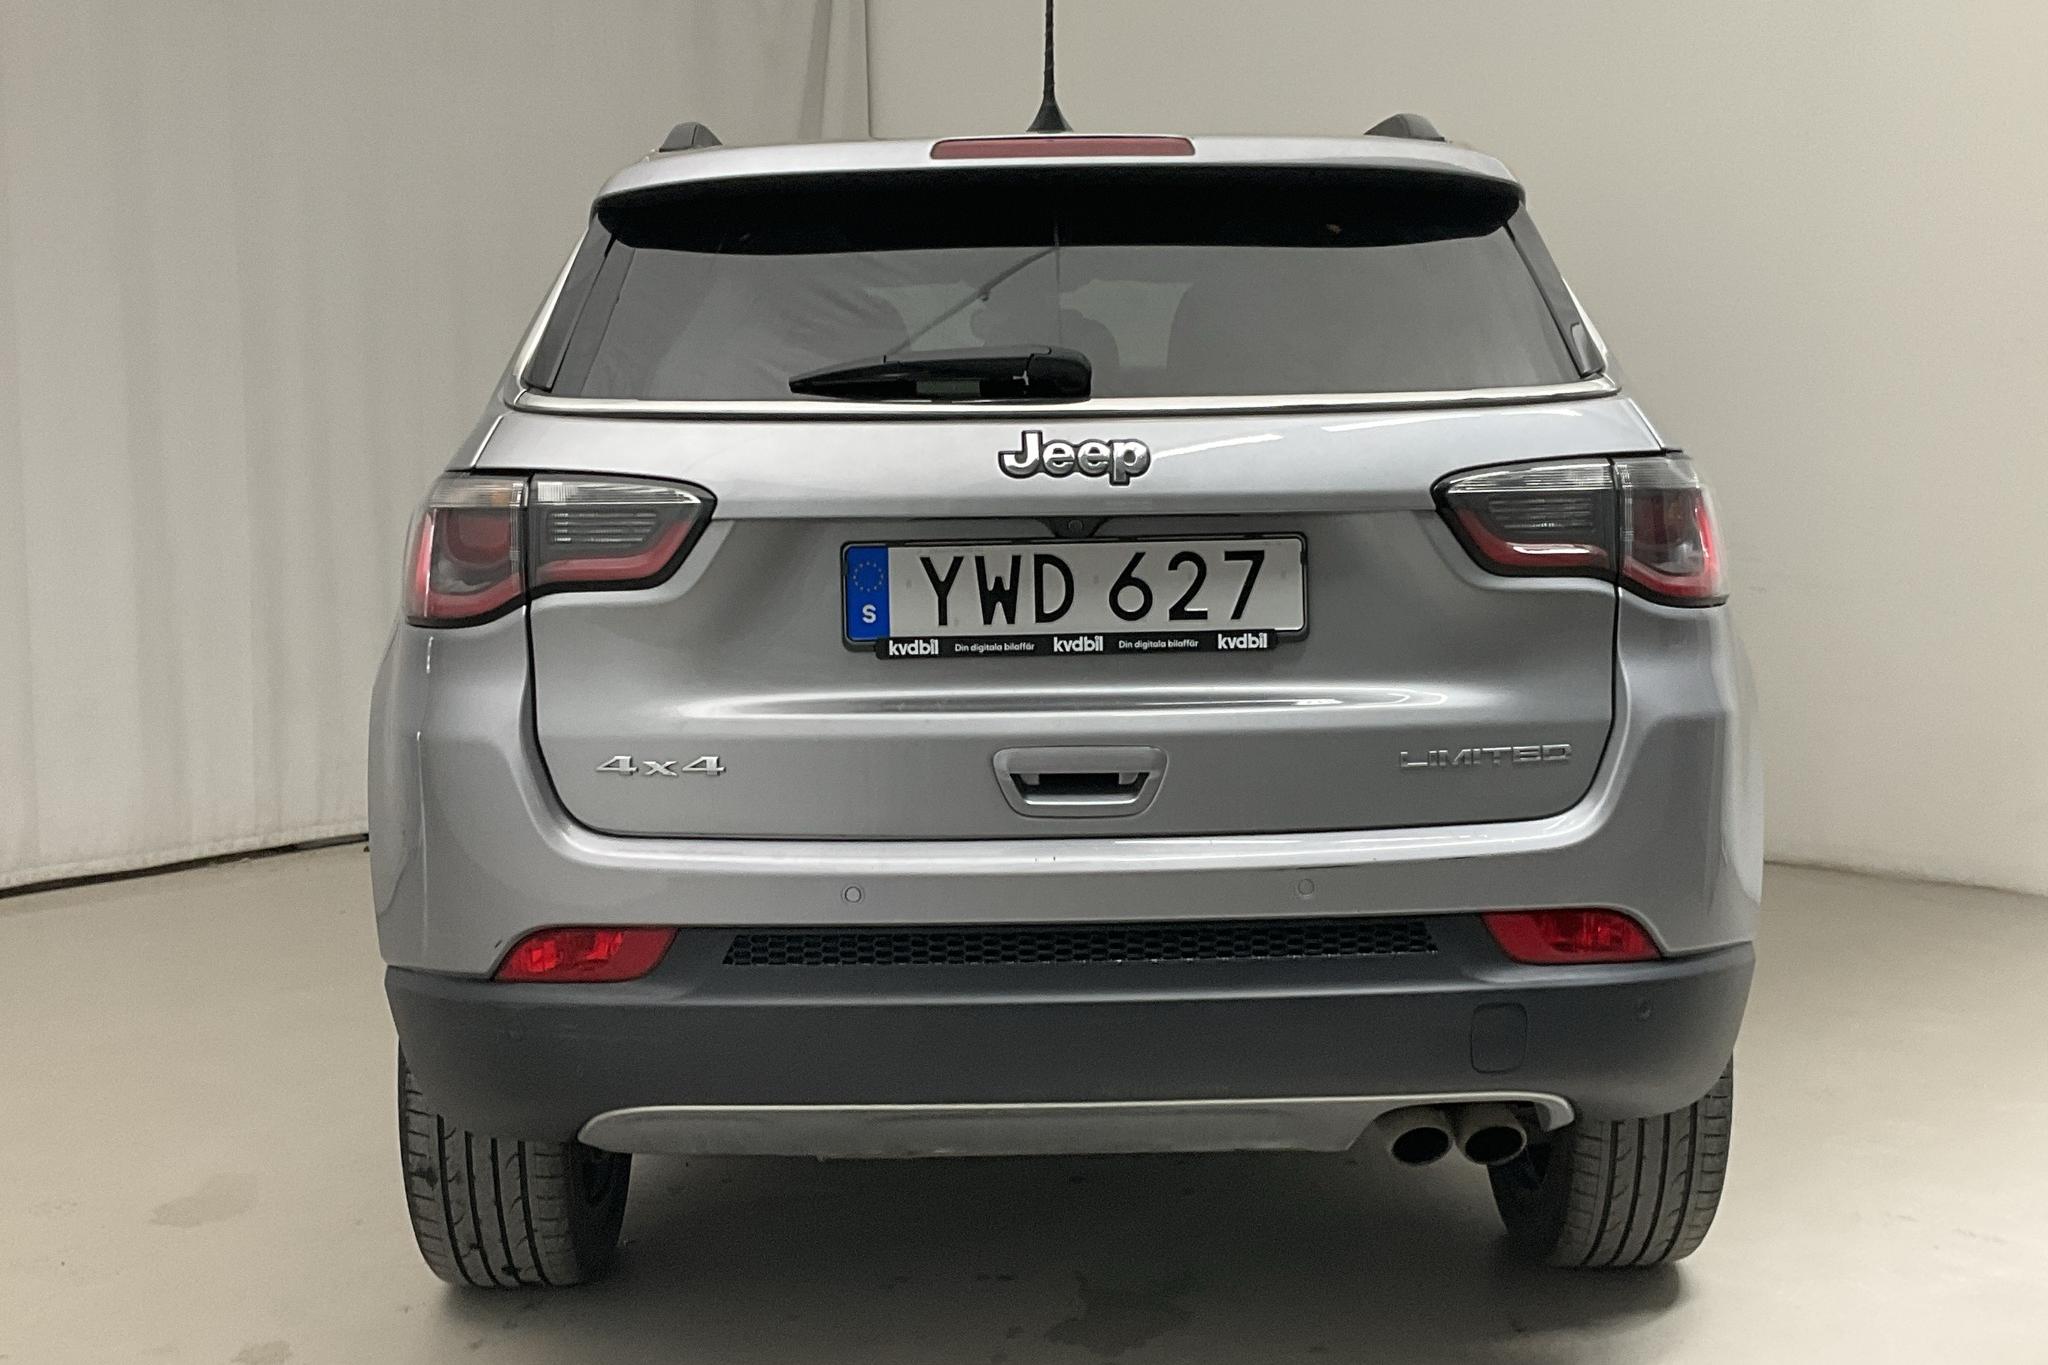 Jeep Compass 1.4 Multiair 4WD (170hk) - 50 840 km - Automatic - gray - 2019